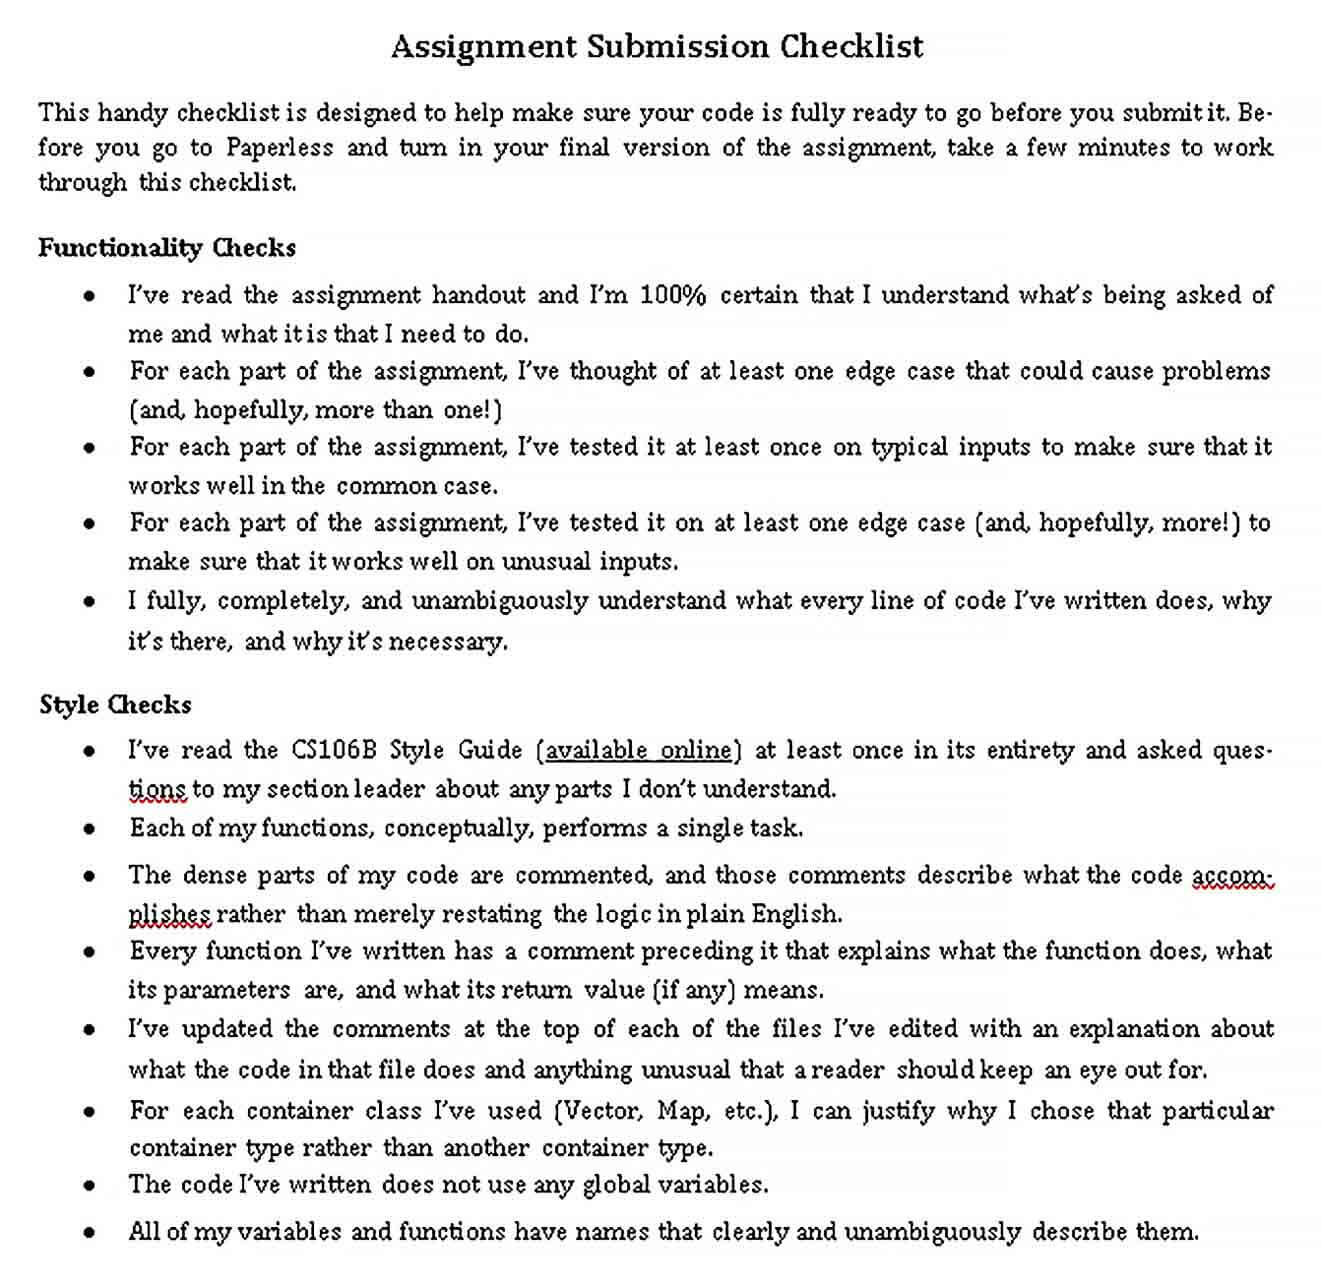 Assignment Submission Checklist